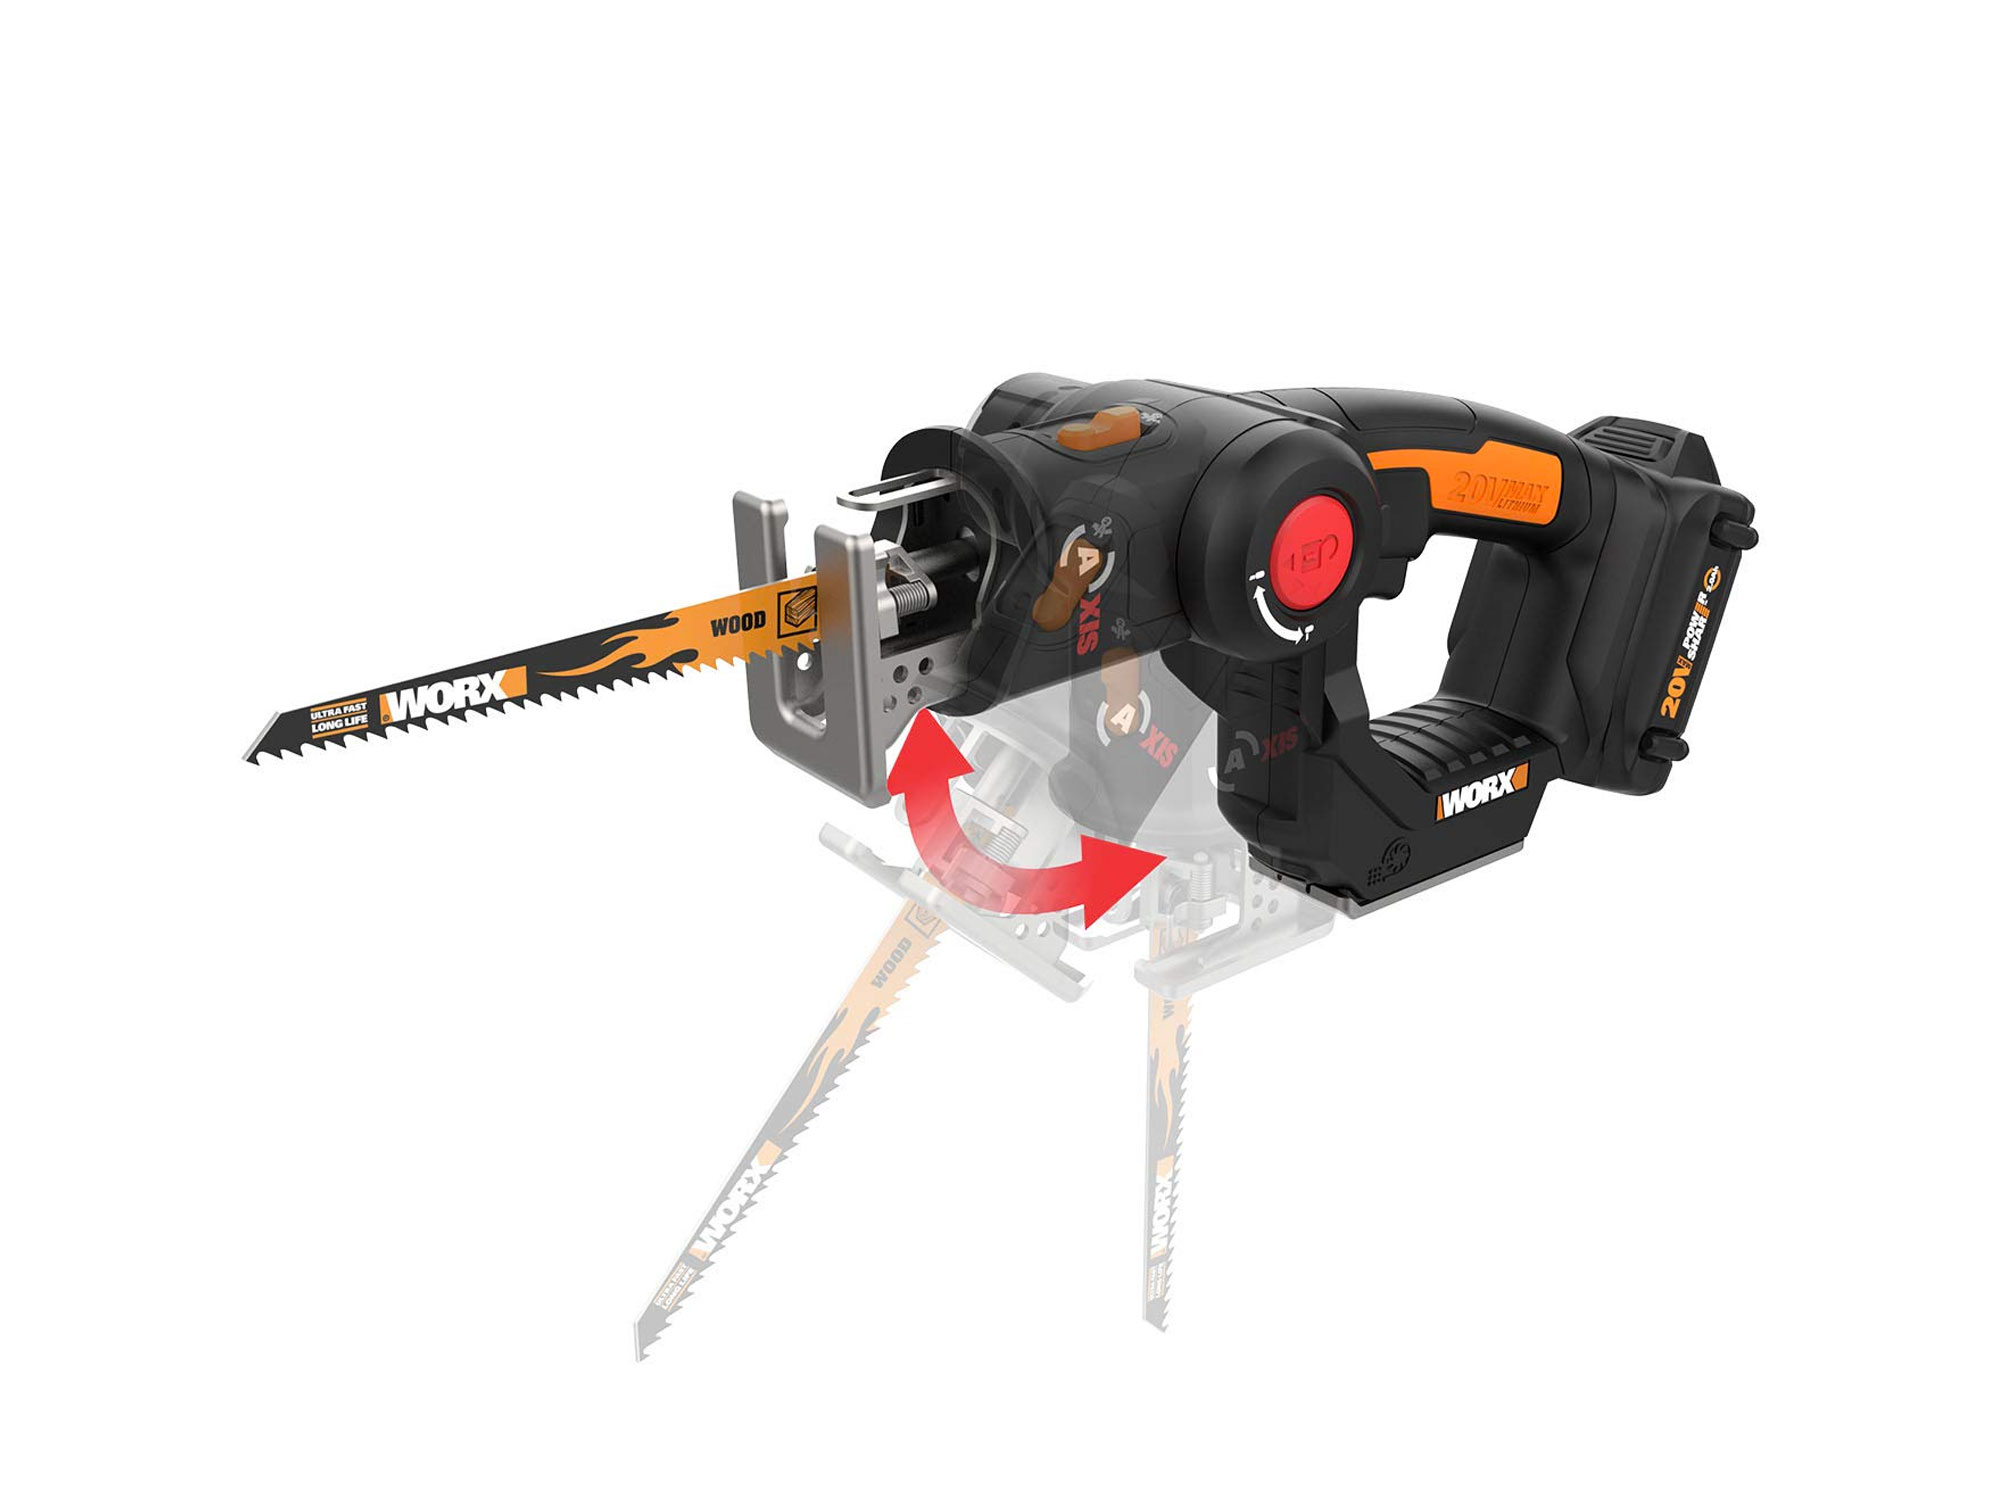 WORX 20V AXIS 2-in-1 Reciprocating Saw and Jigsaw with Orbital Mode